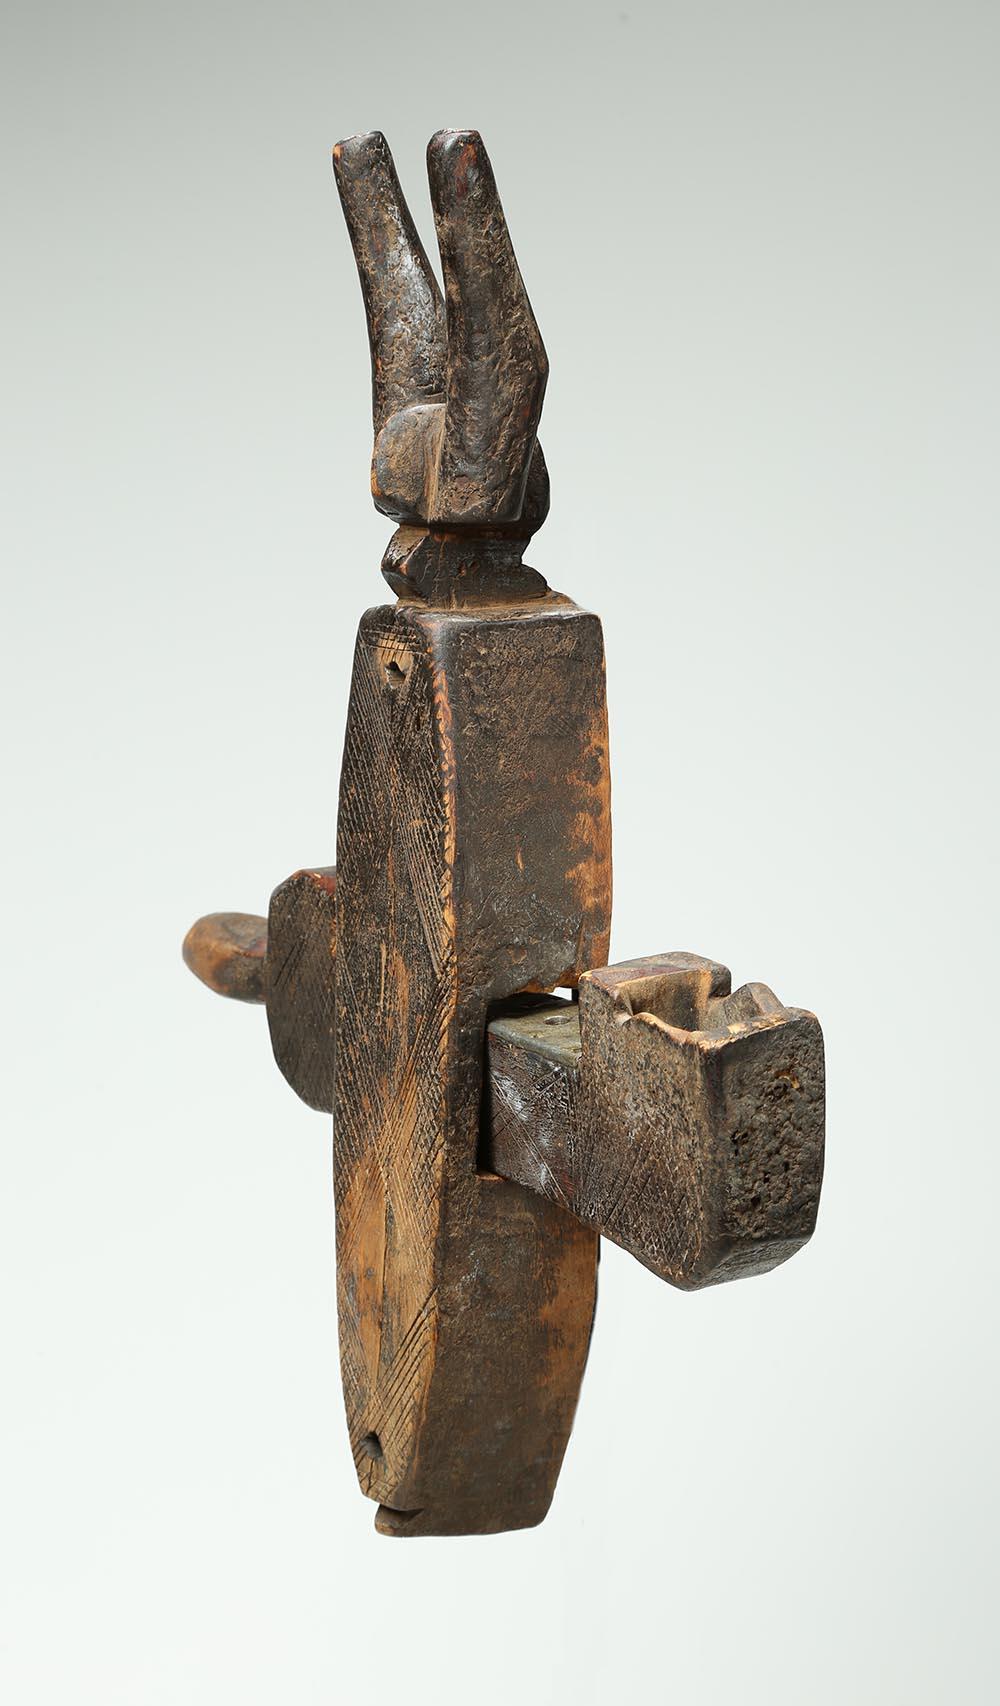 Well-used wood door lock used by the Bambara people, Mali, Africa, with crosspiece. The top is an animal head with horns possibly an antelope. Includes original movable bolt or crosspiece. Heavy wear and encrusted patina from extensive use. Stylized